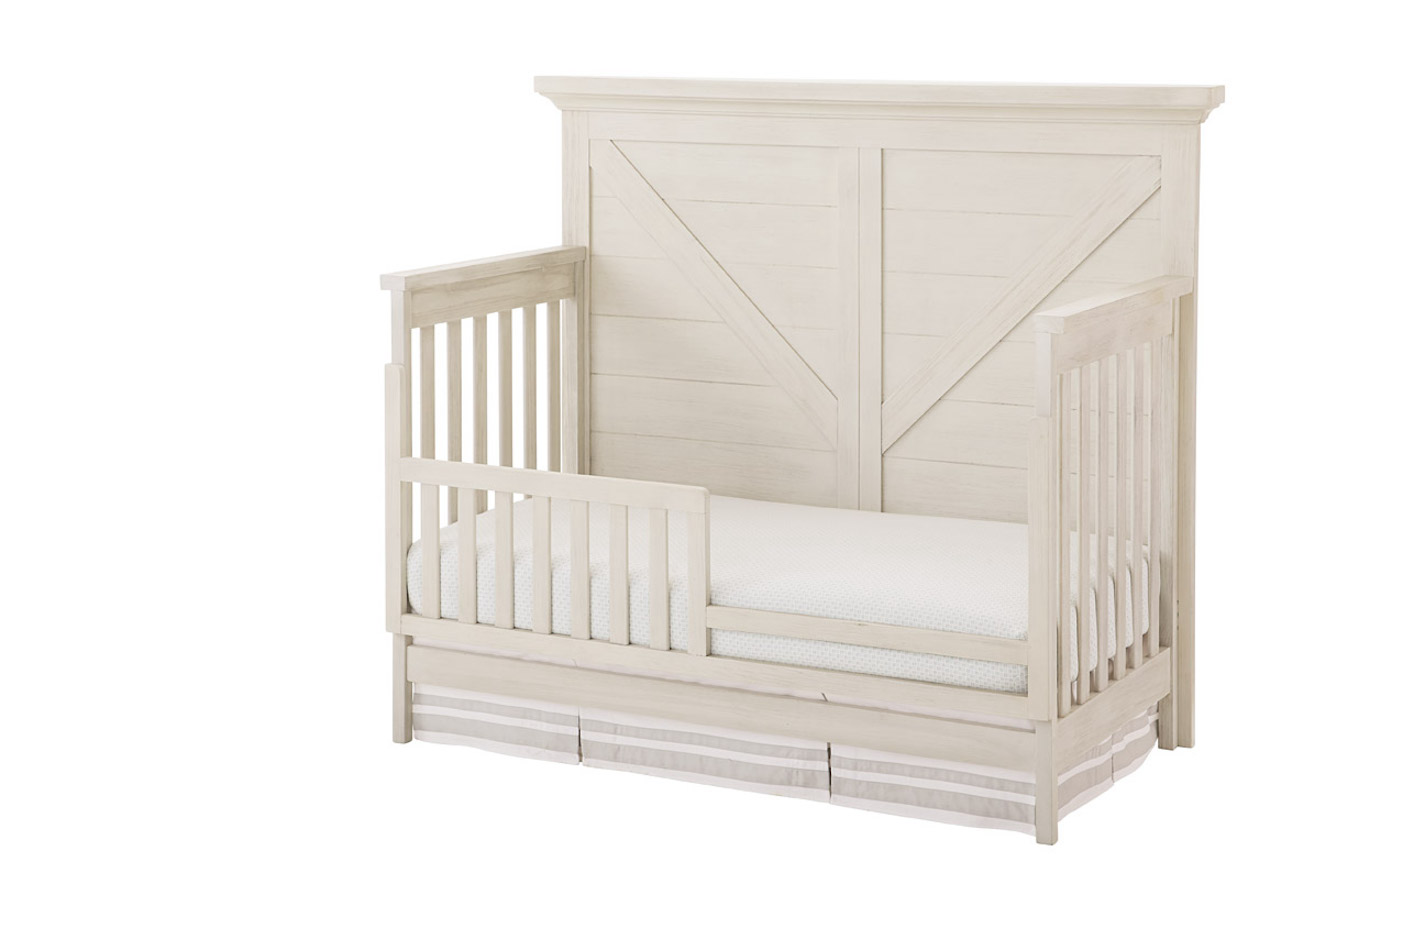 Westwood Design Westfield Convertible Crib - Brushed White